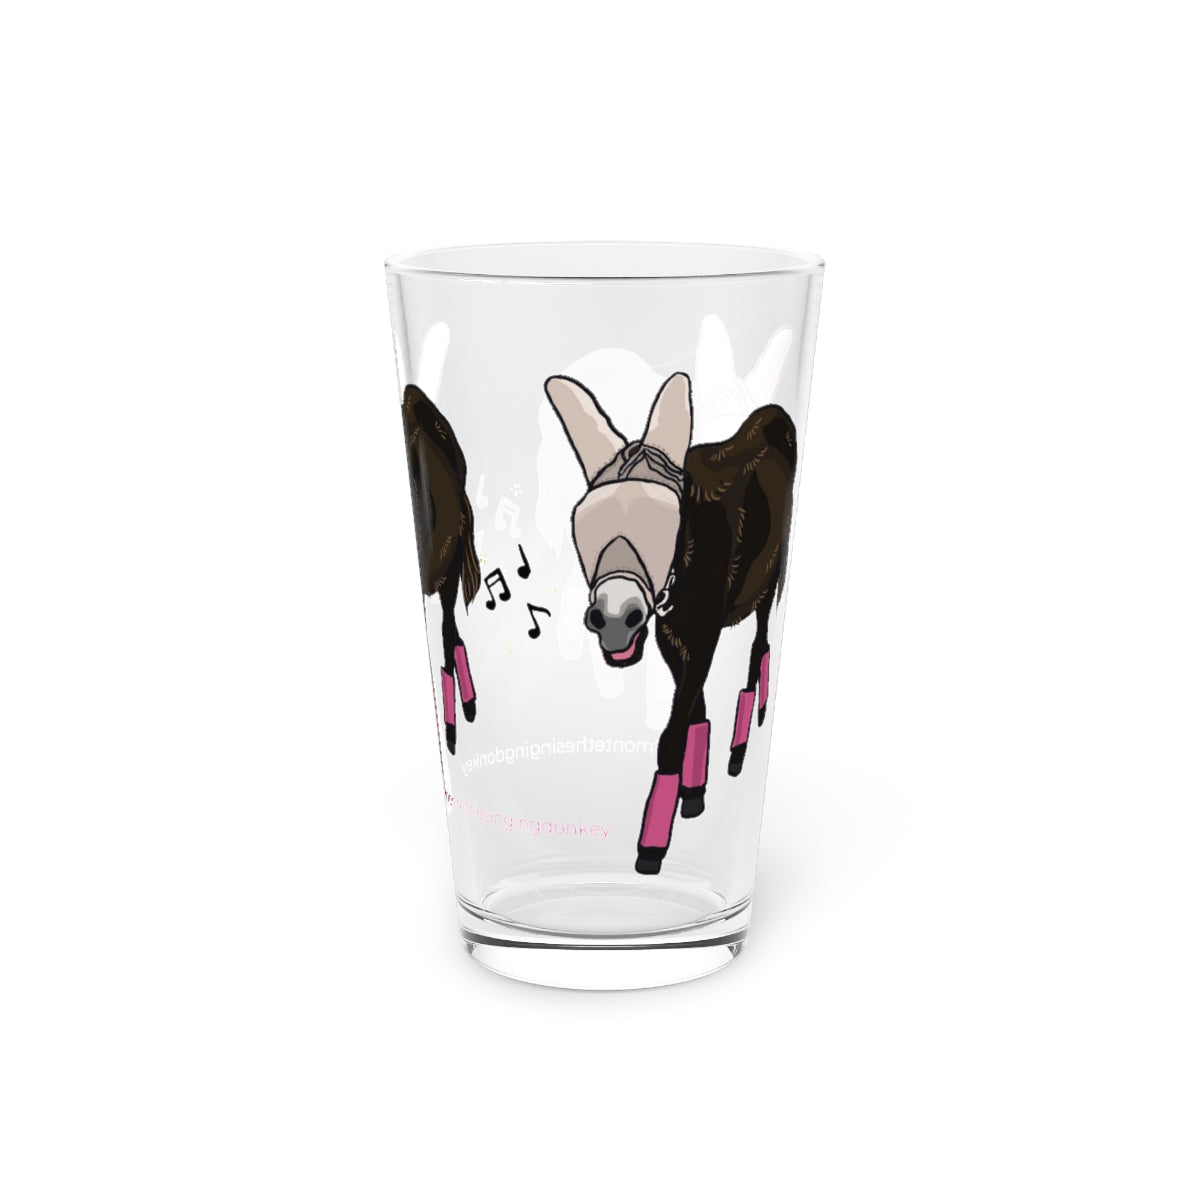 Monte the Singing Donkey - Fly Gear Pint Glass, 16oz